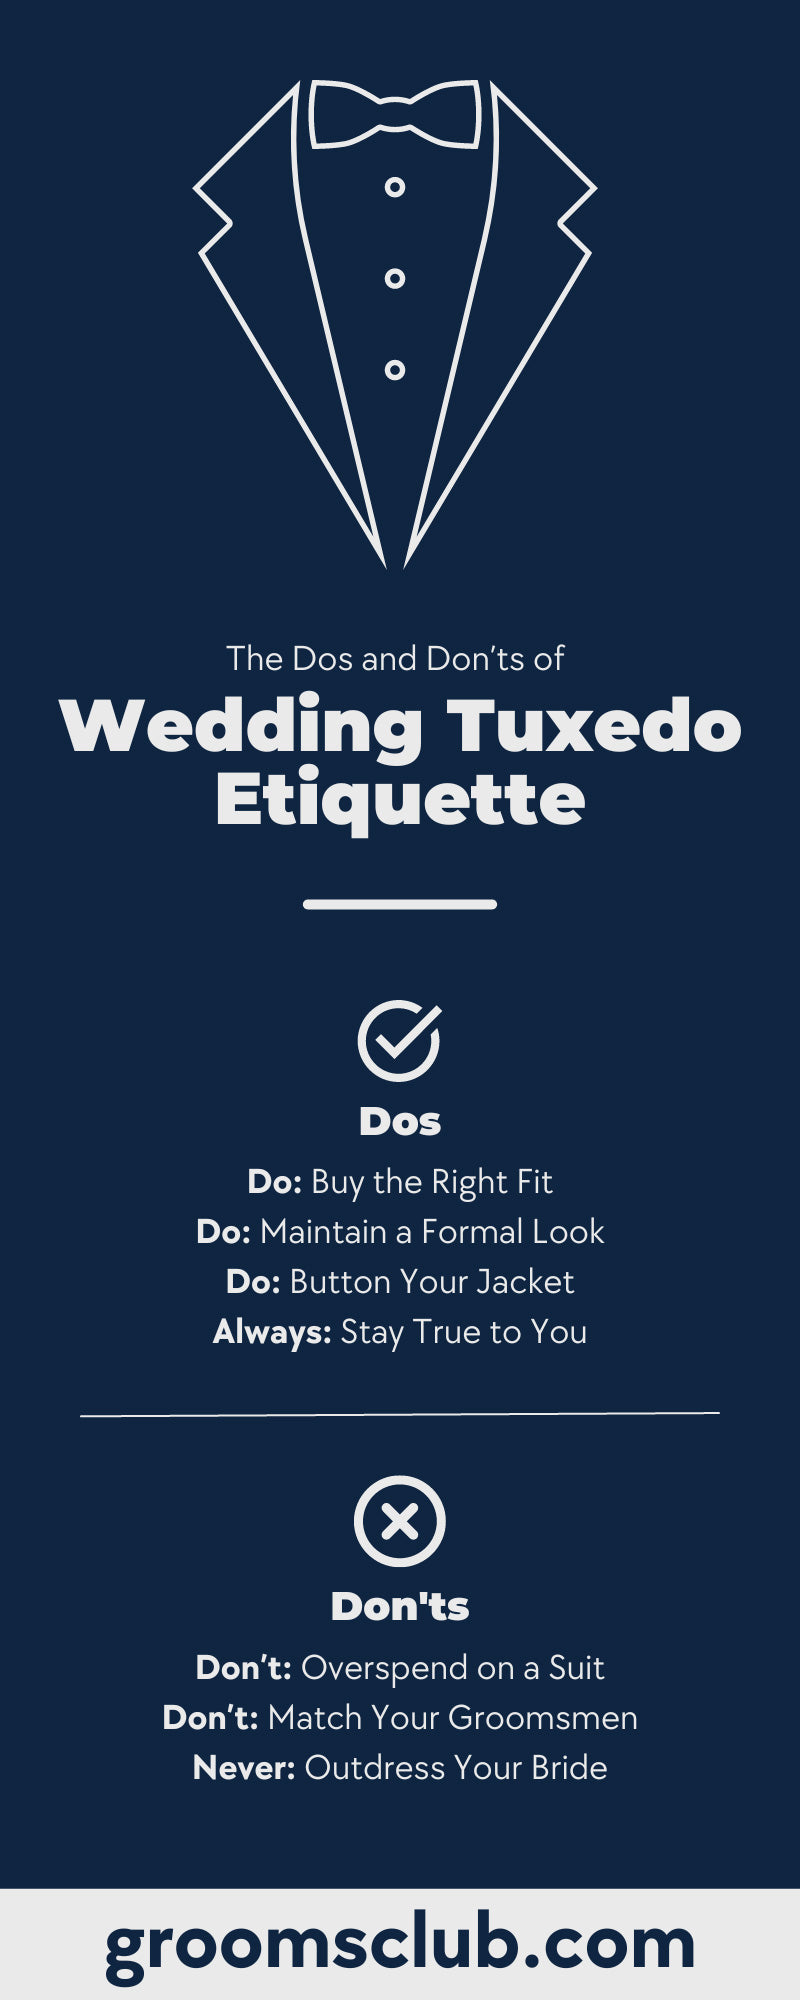 The Dos and Don’ts of Wedding Tuxedo Etiquette